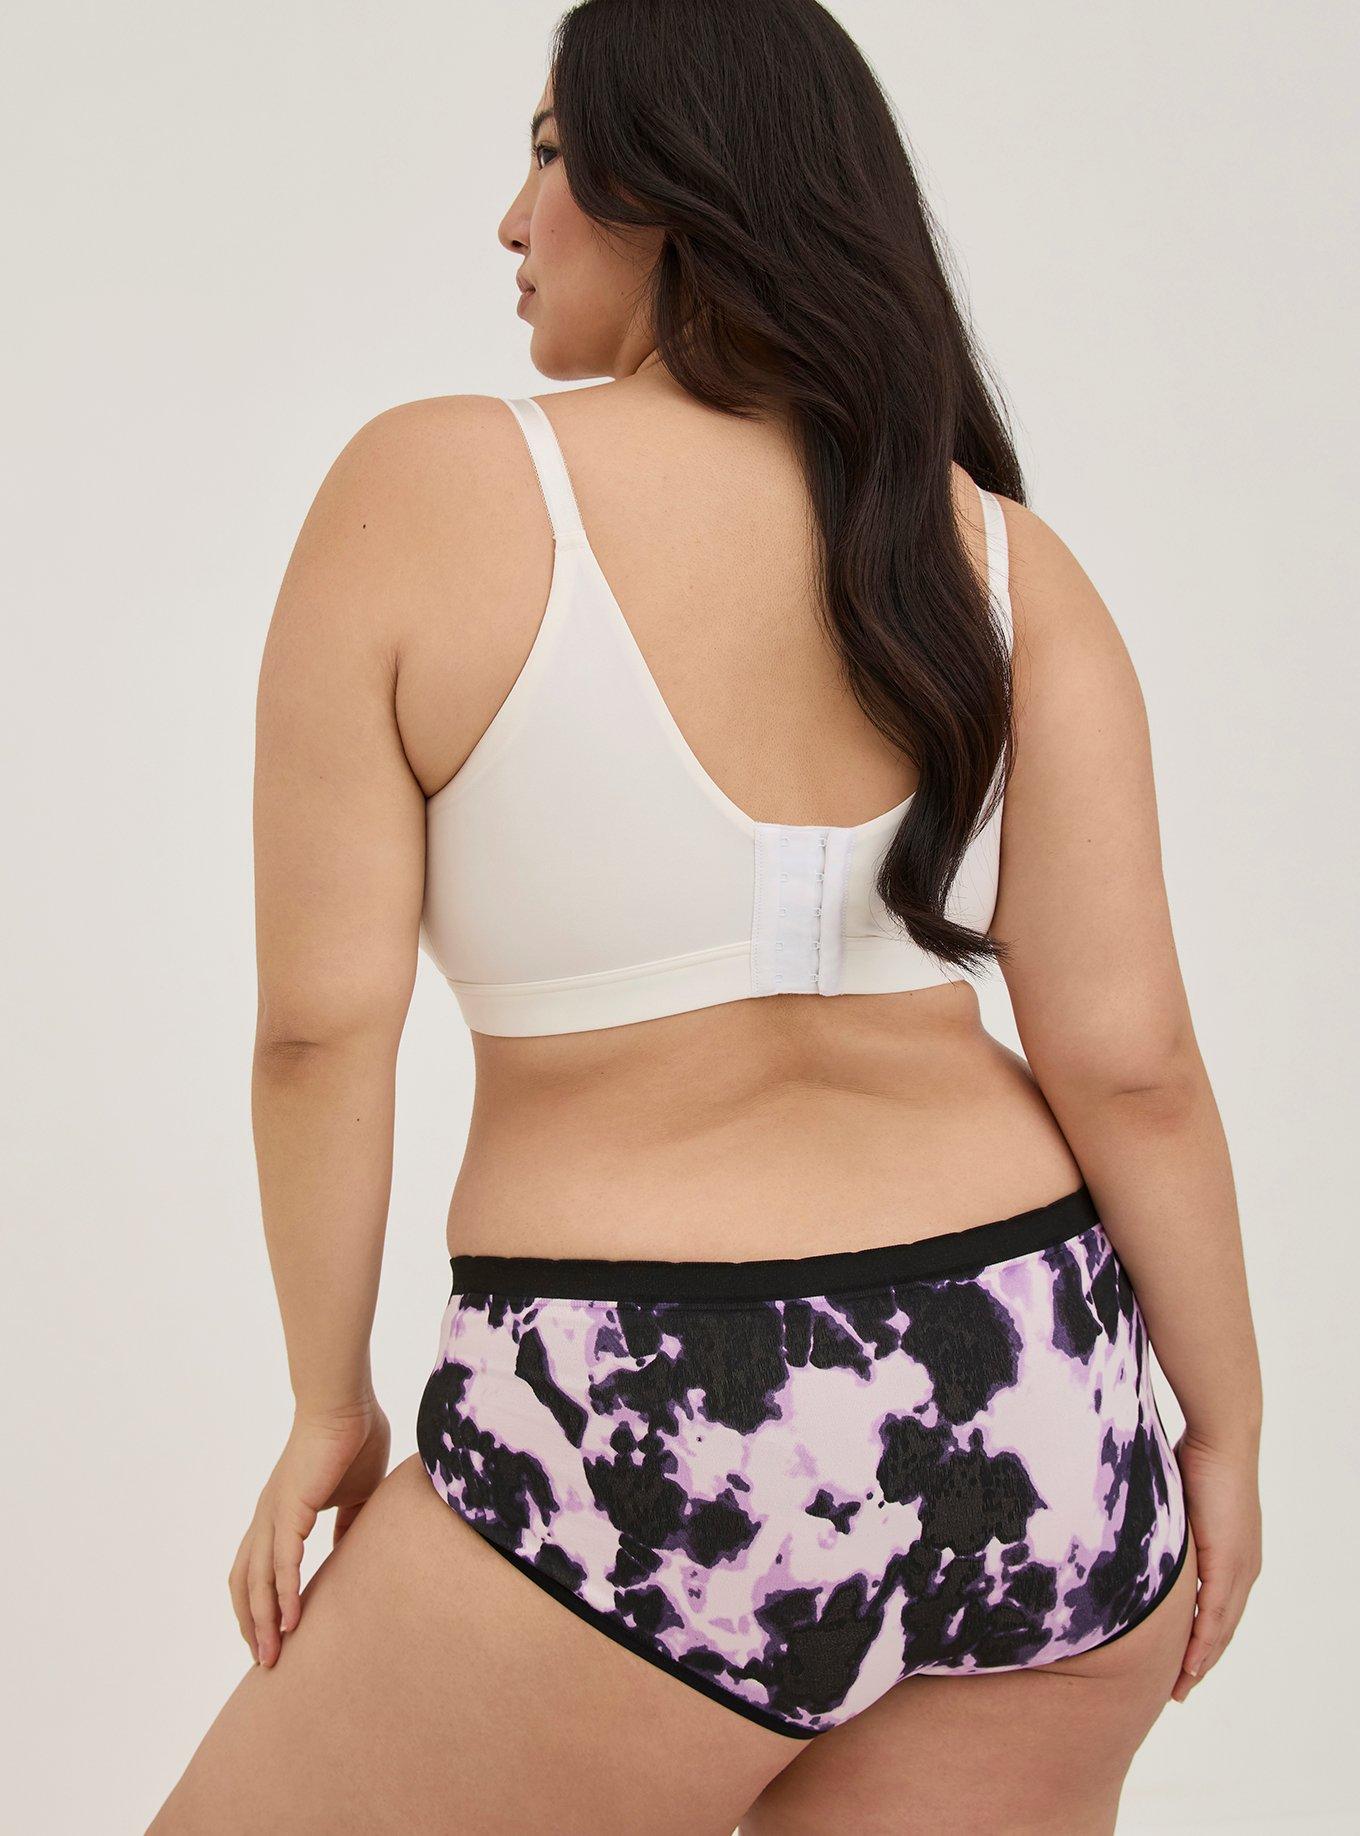 Plus Size - Seamless Smooth Mid-Rise Cheeky Panty - Torrid